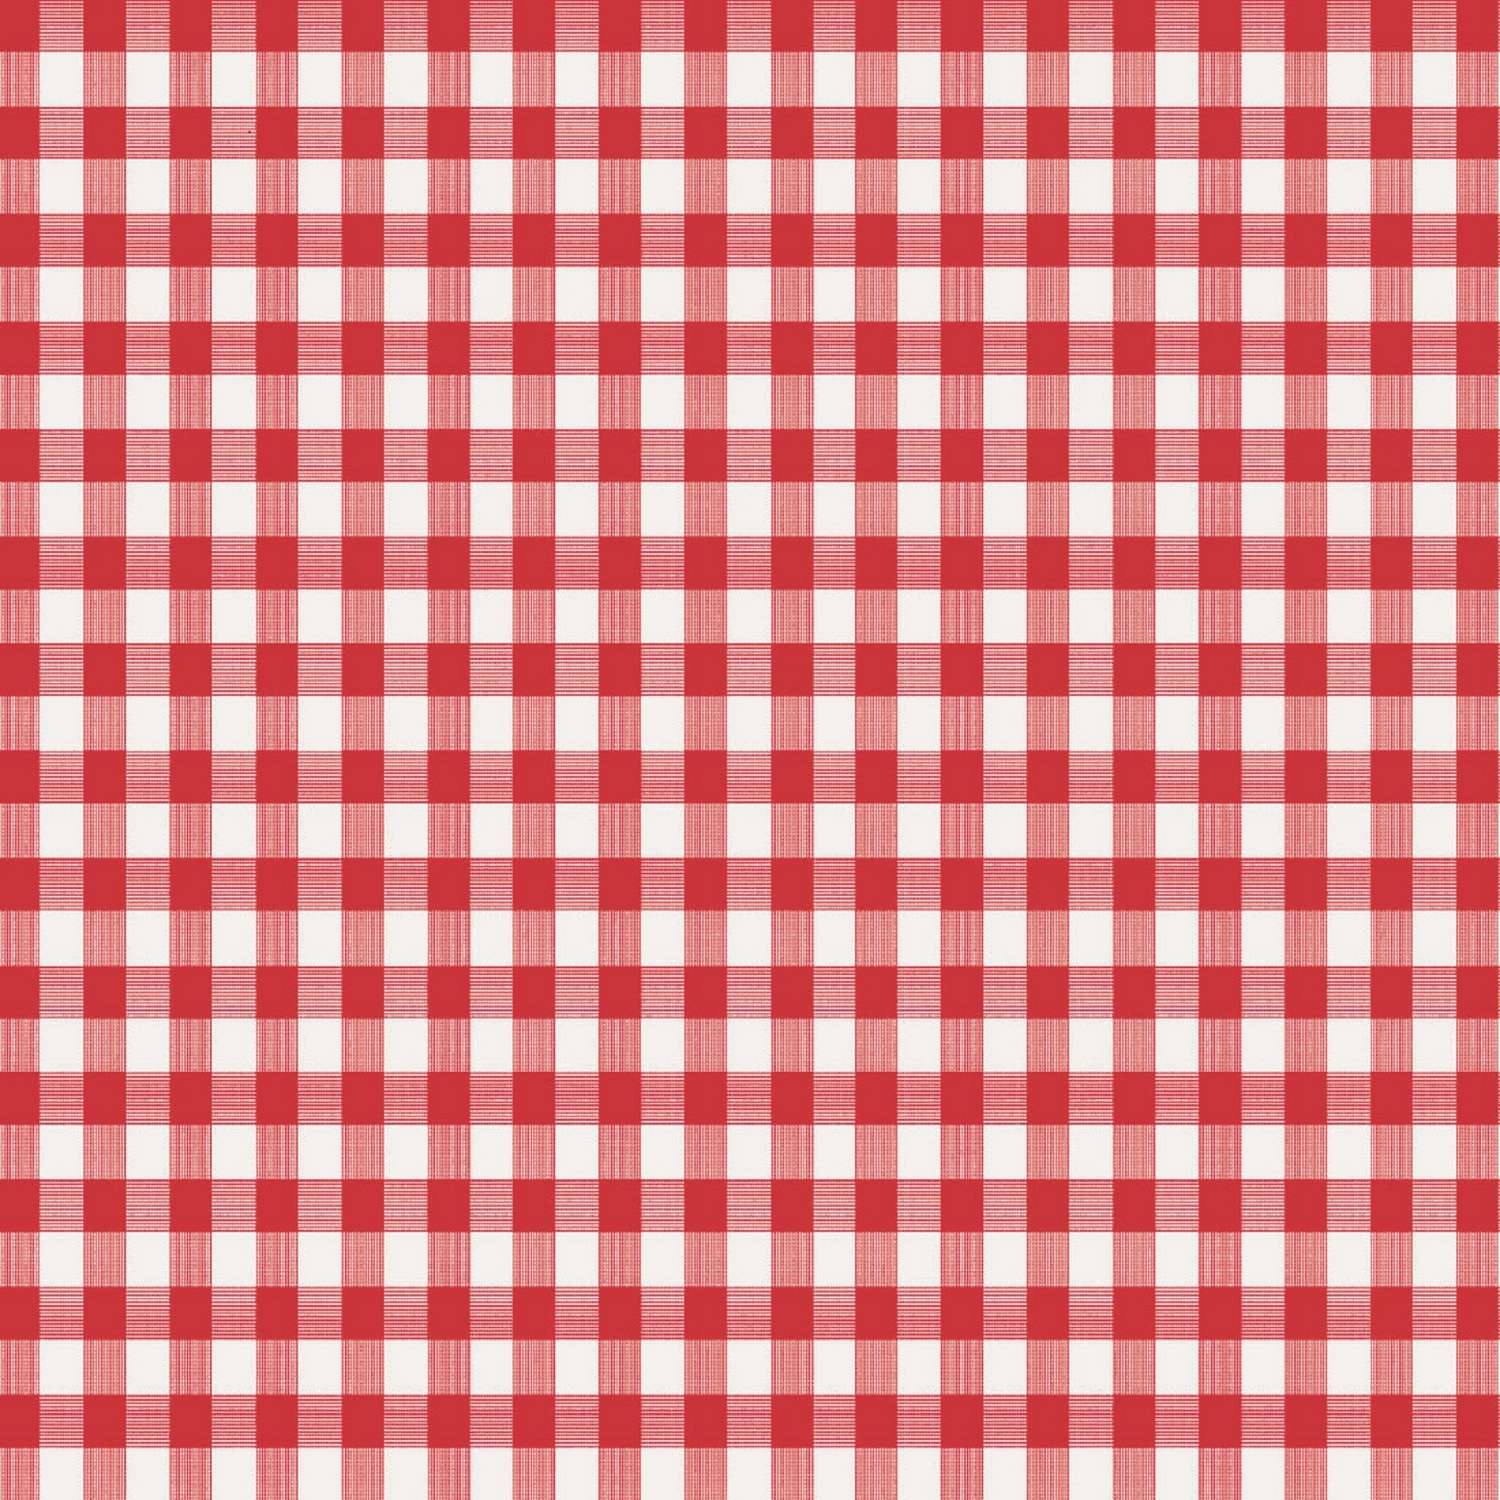 C57-1 Code Red Heart Check PVC Wipe Clean Vinyl Tablecloth ALL SIZES